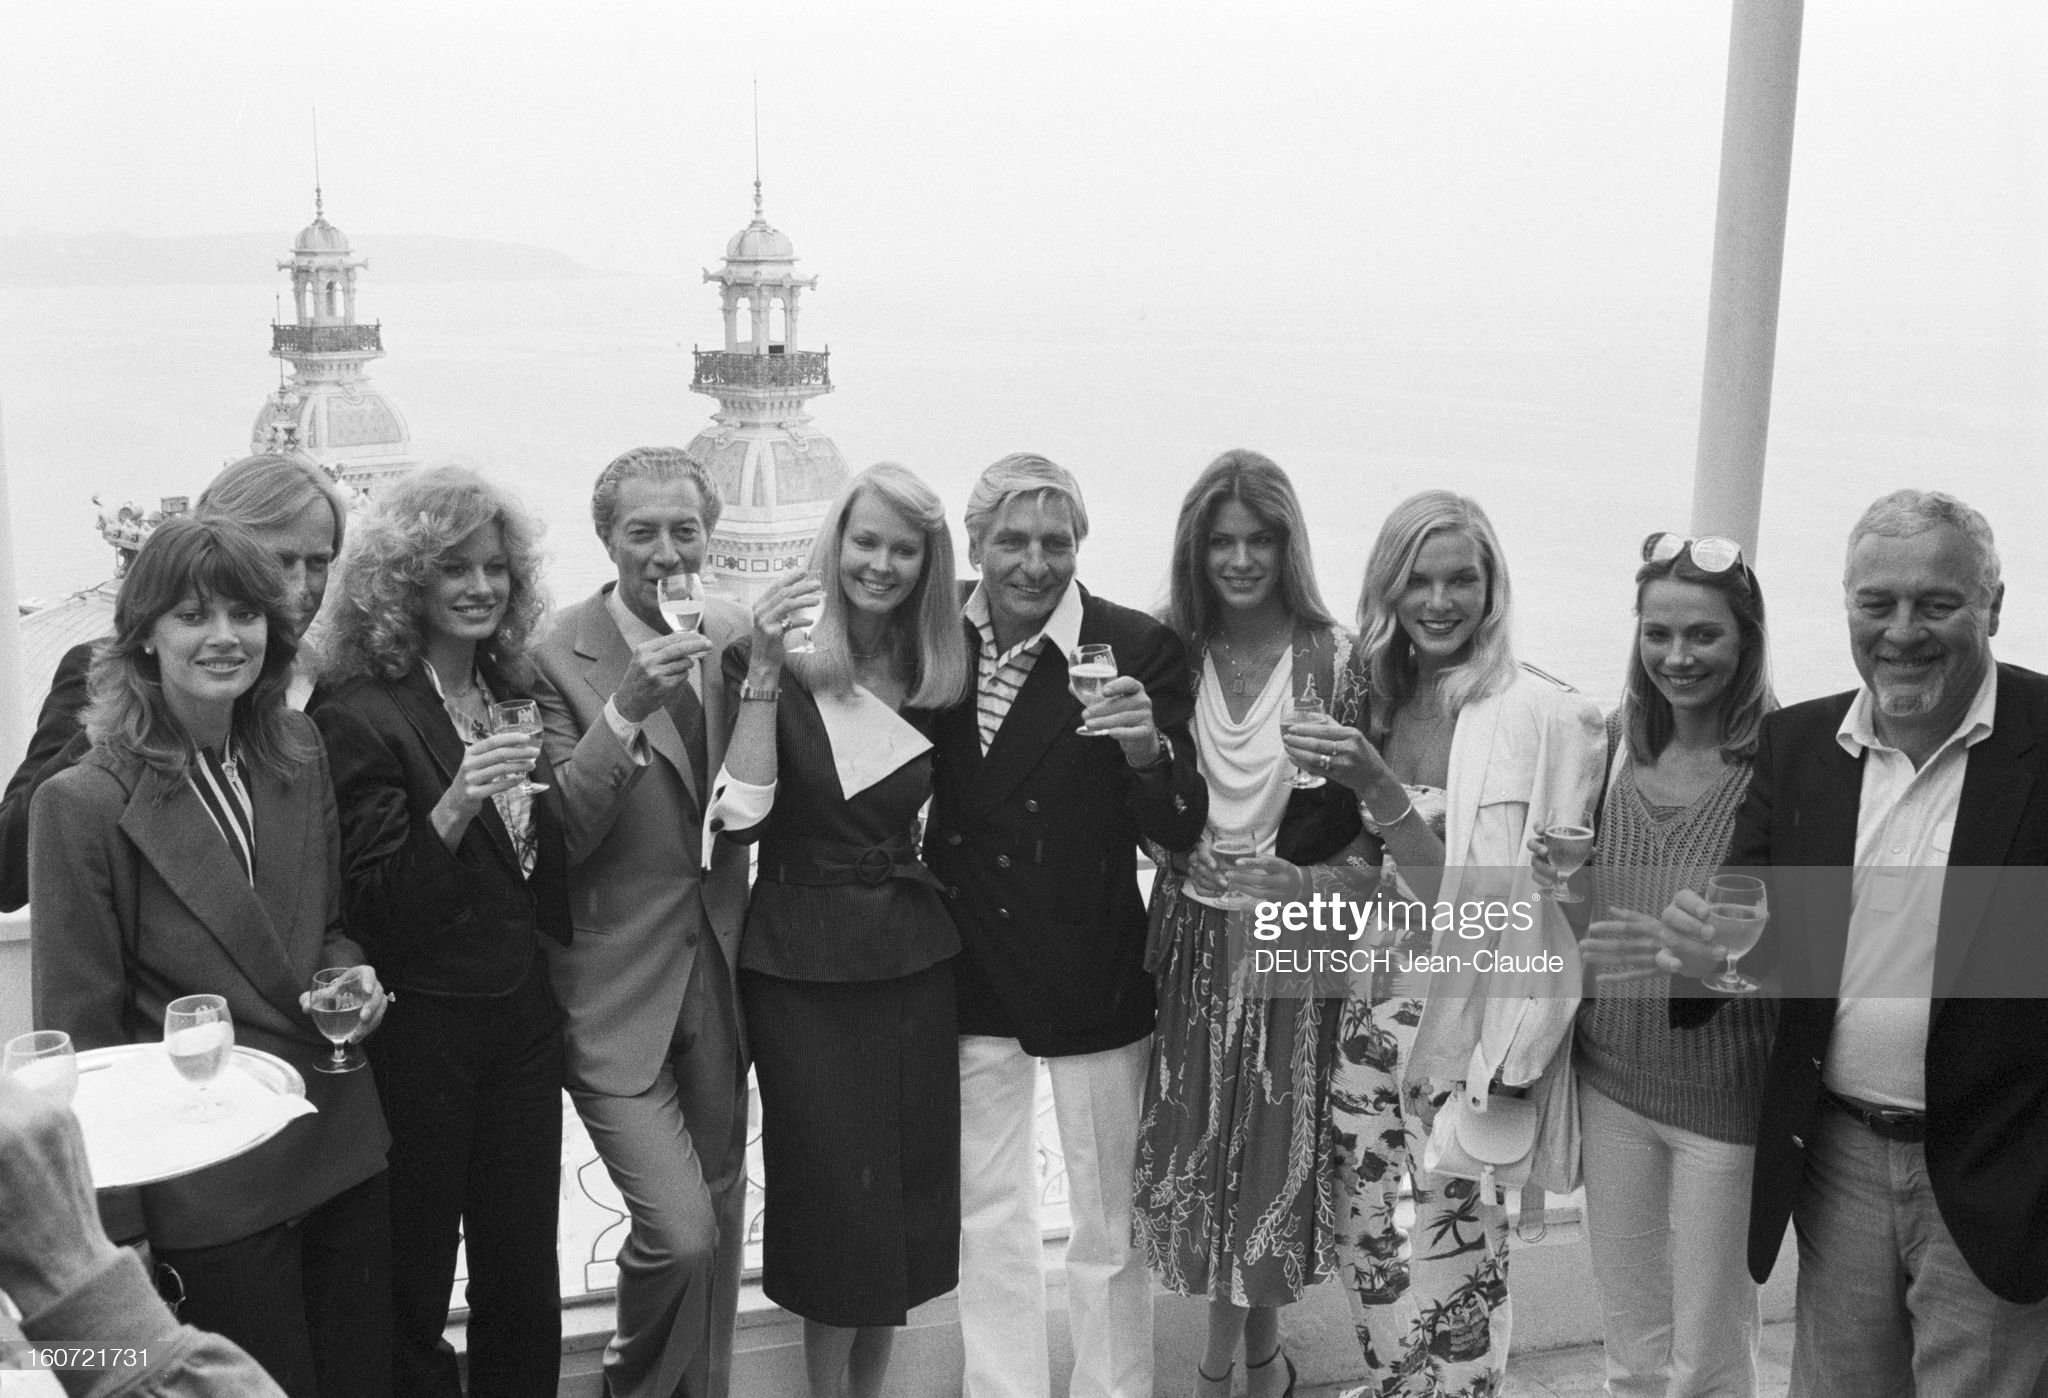 May 18, 1980, at the reception of Fred Chandon during the Monaco Formula 1 Grand Prix, from left to right, raising their glasses: an unidentified woman and an unidentified man, Mirja Larsson (Swedish model), the wife of Gunther Sachs, Lisa Klint (childhood friend of Mirja), an unidentified man and American model Kelly Ball, two unidentified women and an unidentified man.